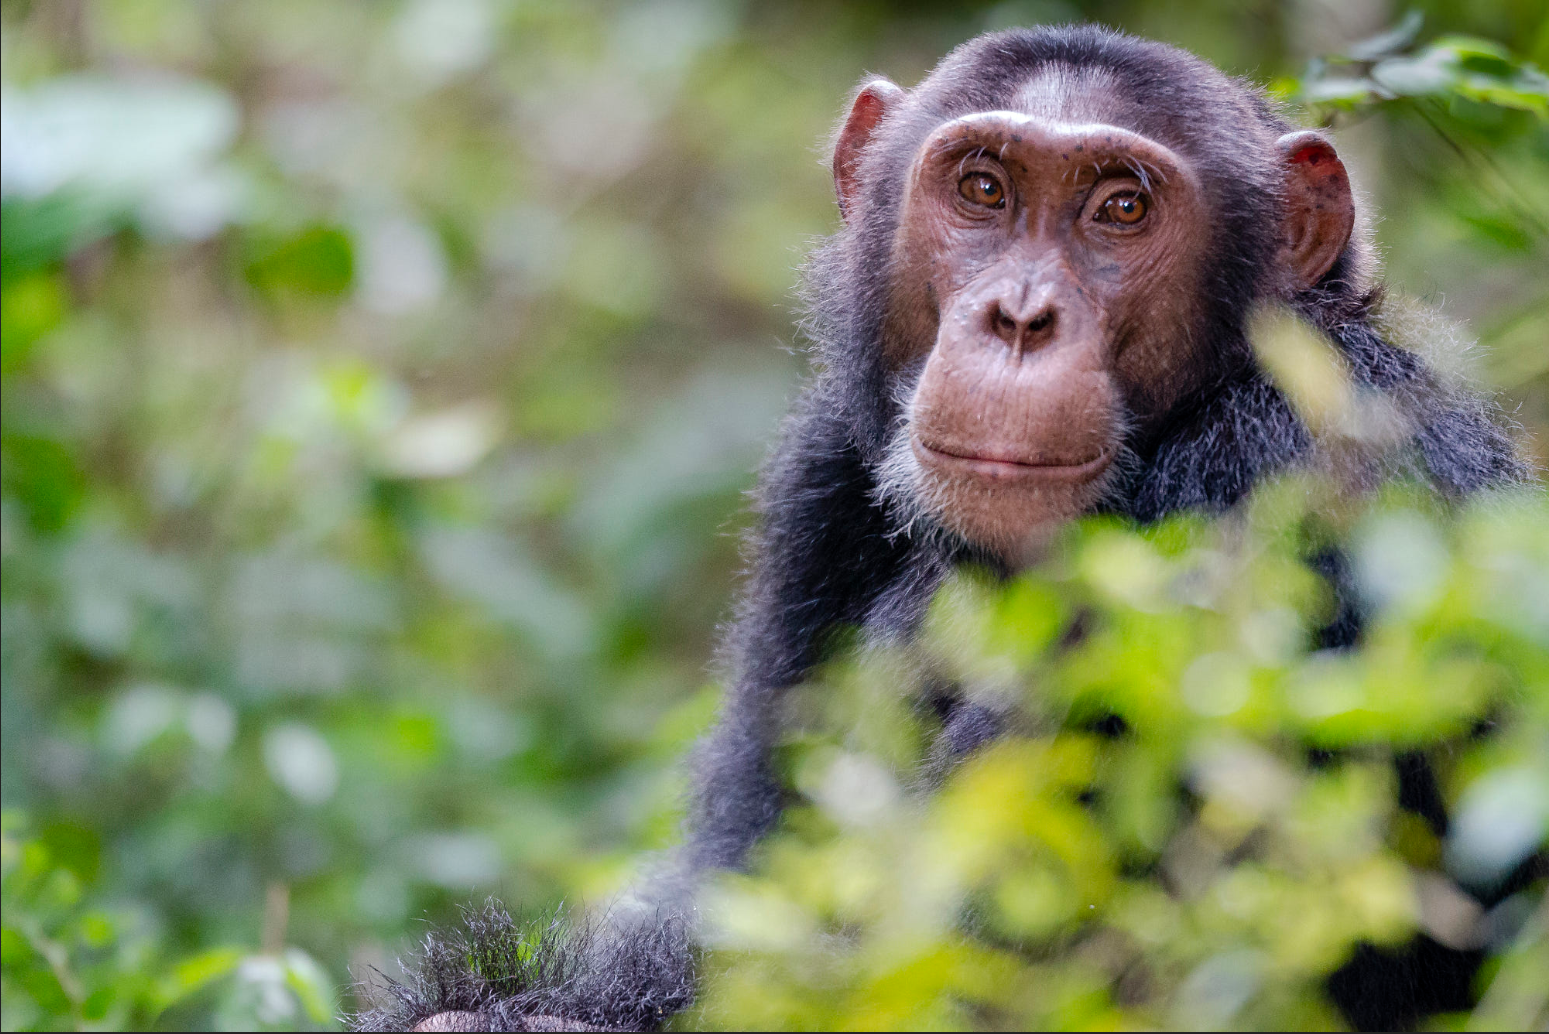 10 fascinating facts about chimpanzees you didn't know